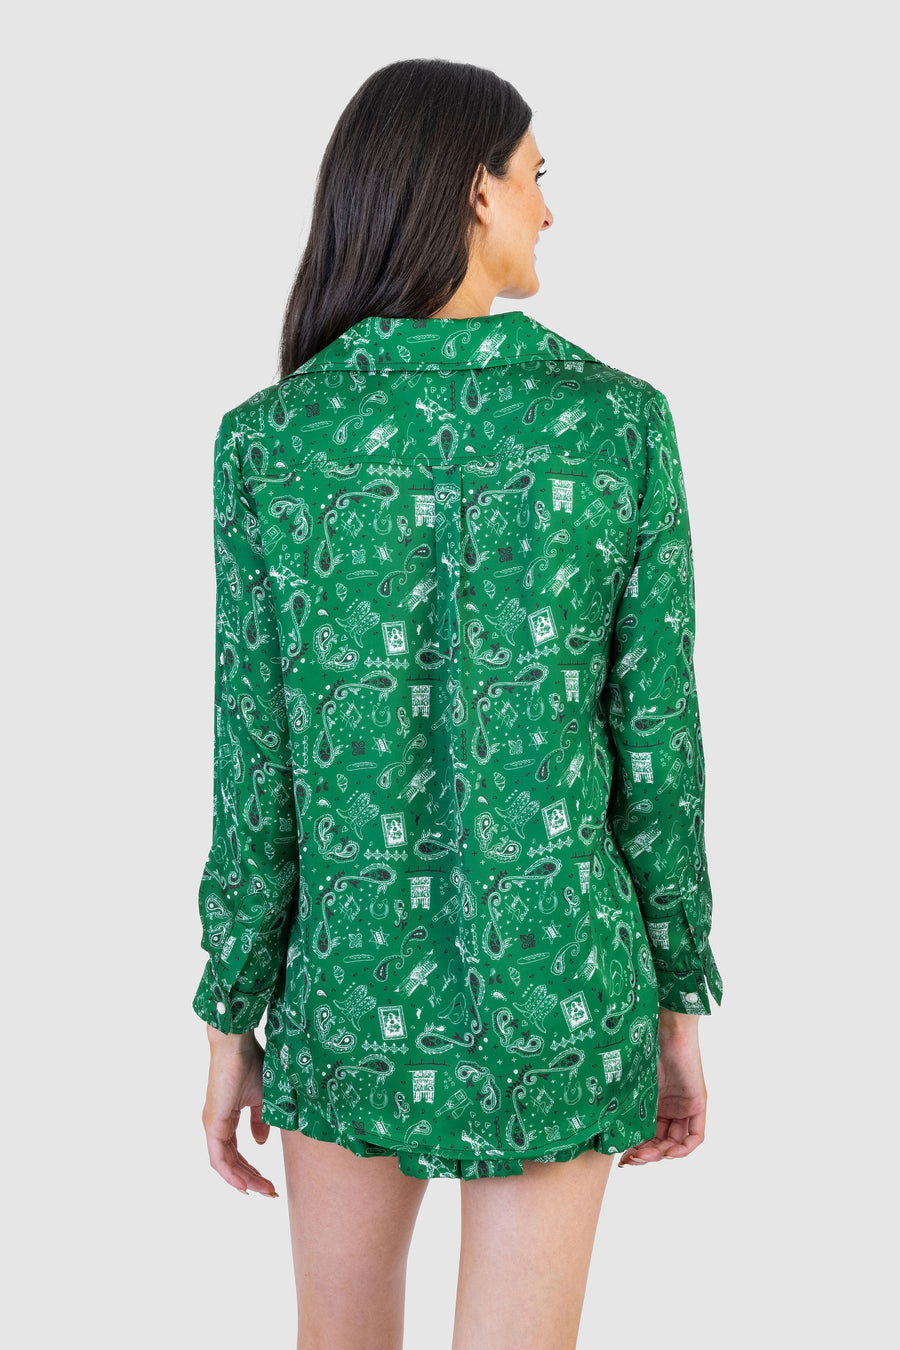 Anderson Top Parisian Kelly Green *Limited*Edition*